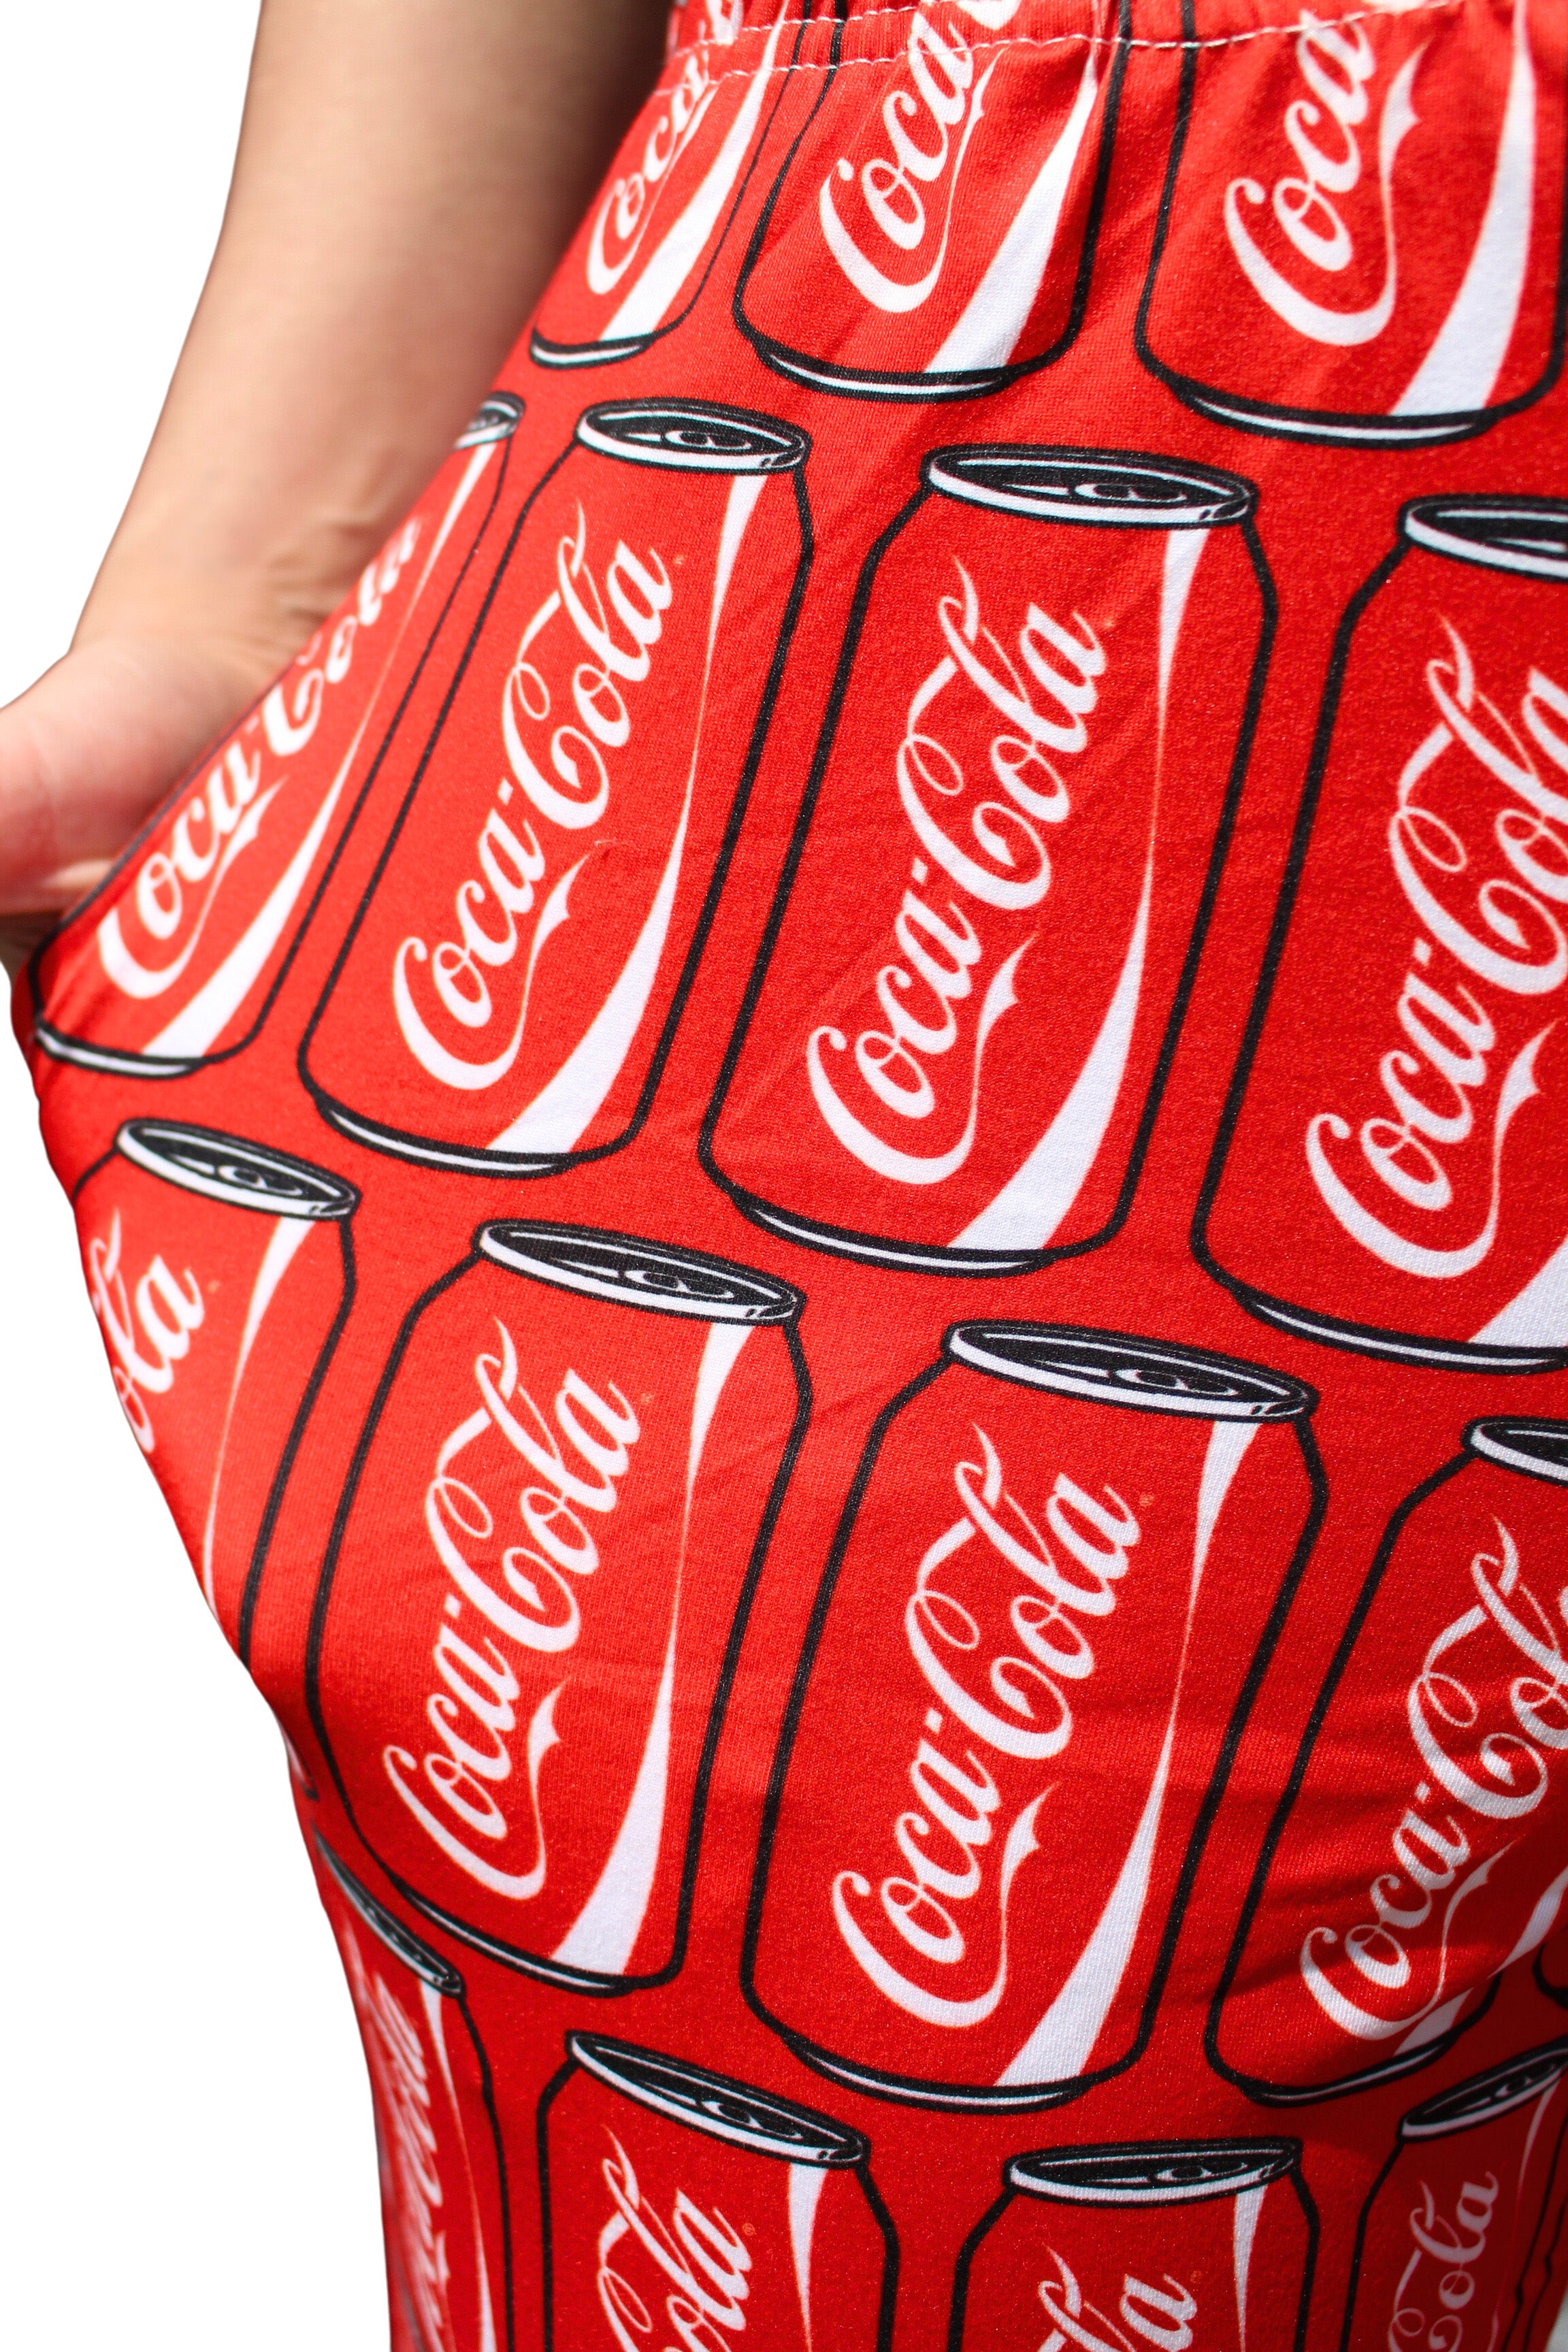 Coca-Cola Can Pattern Pajama Lounge Pants on model close up view of coca cola can pattern by right pocket